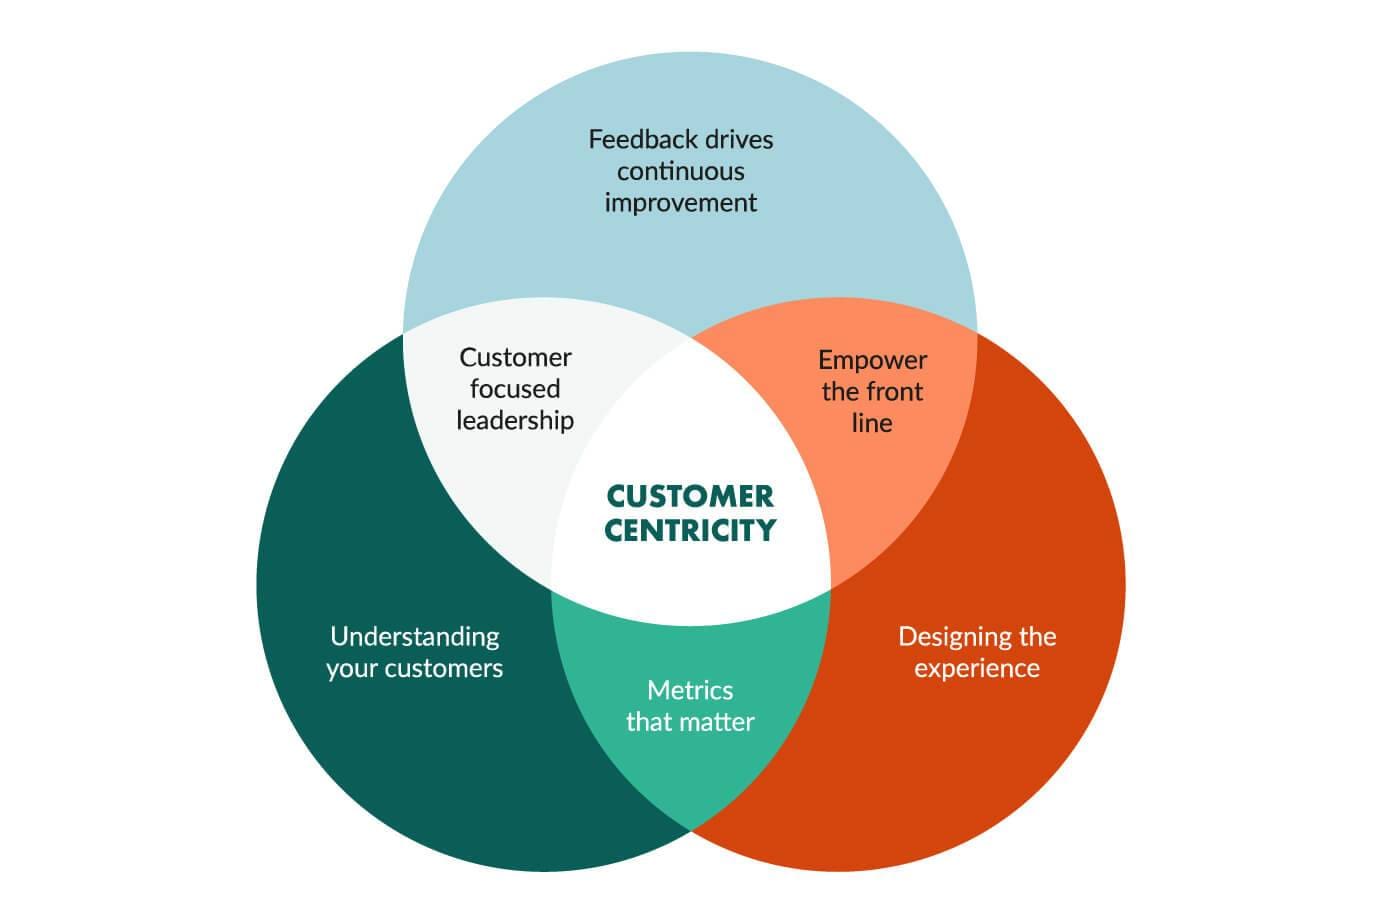 9. Making informed decisions with accurate customer data